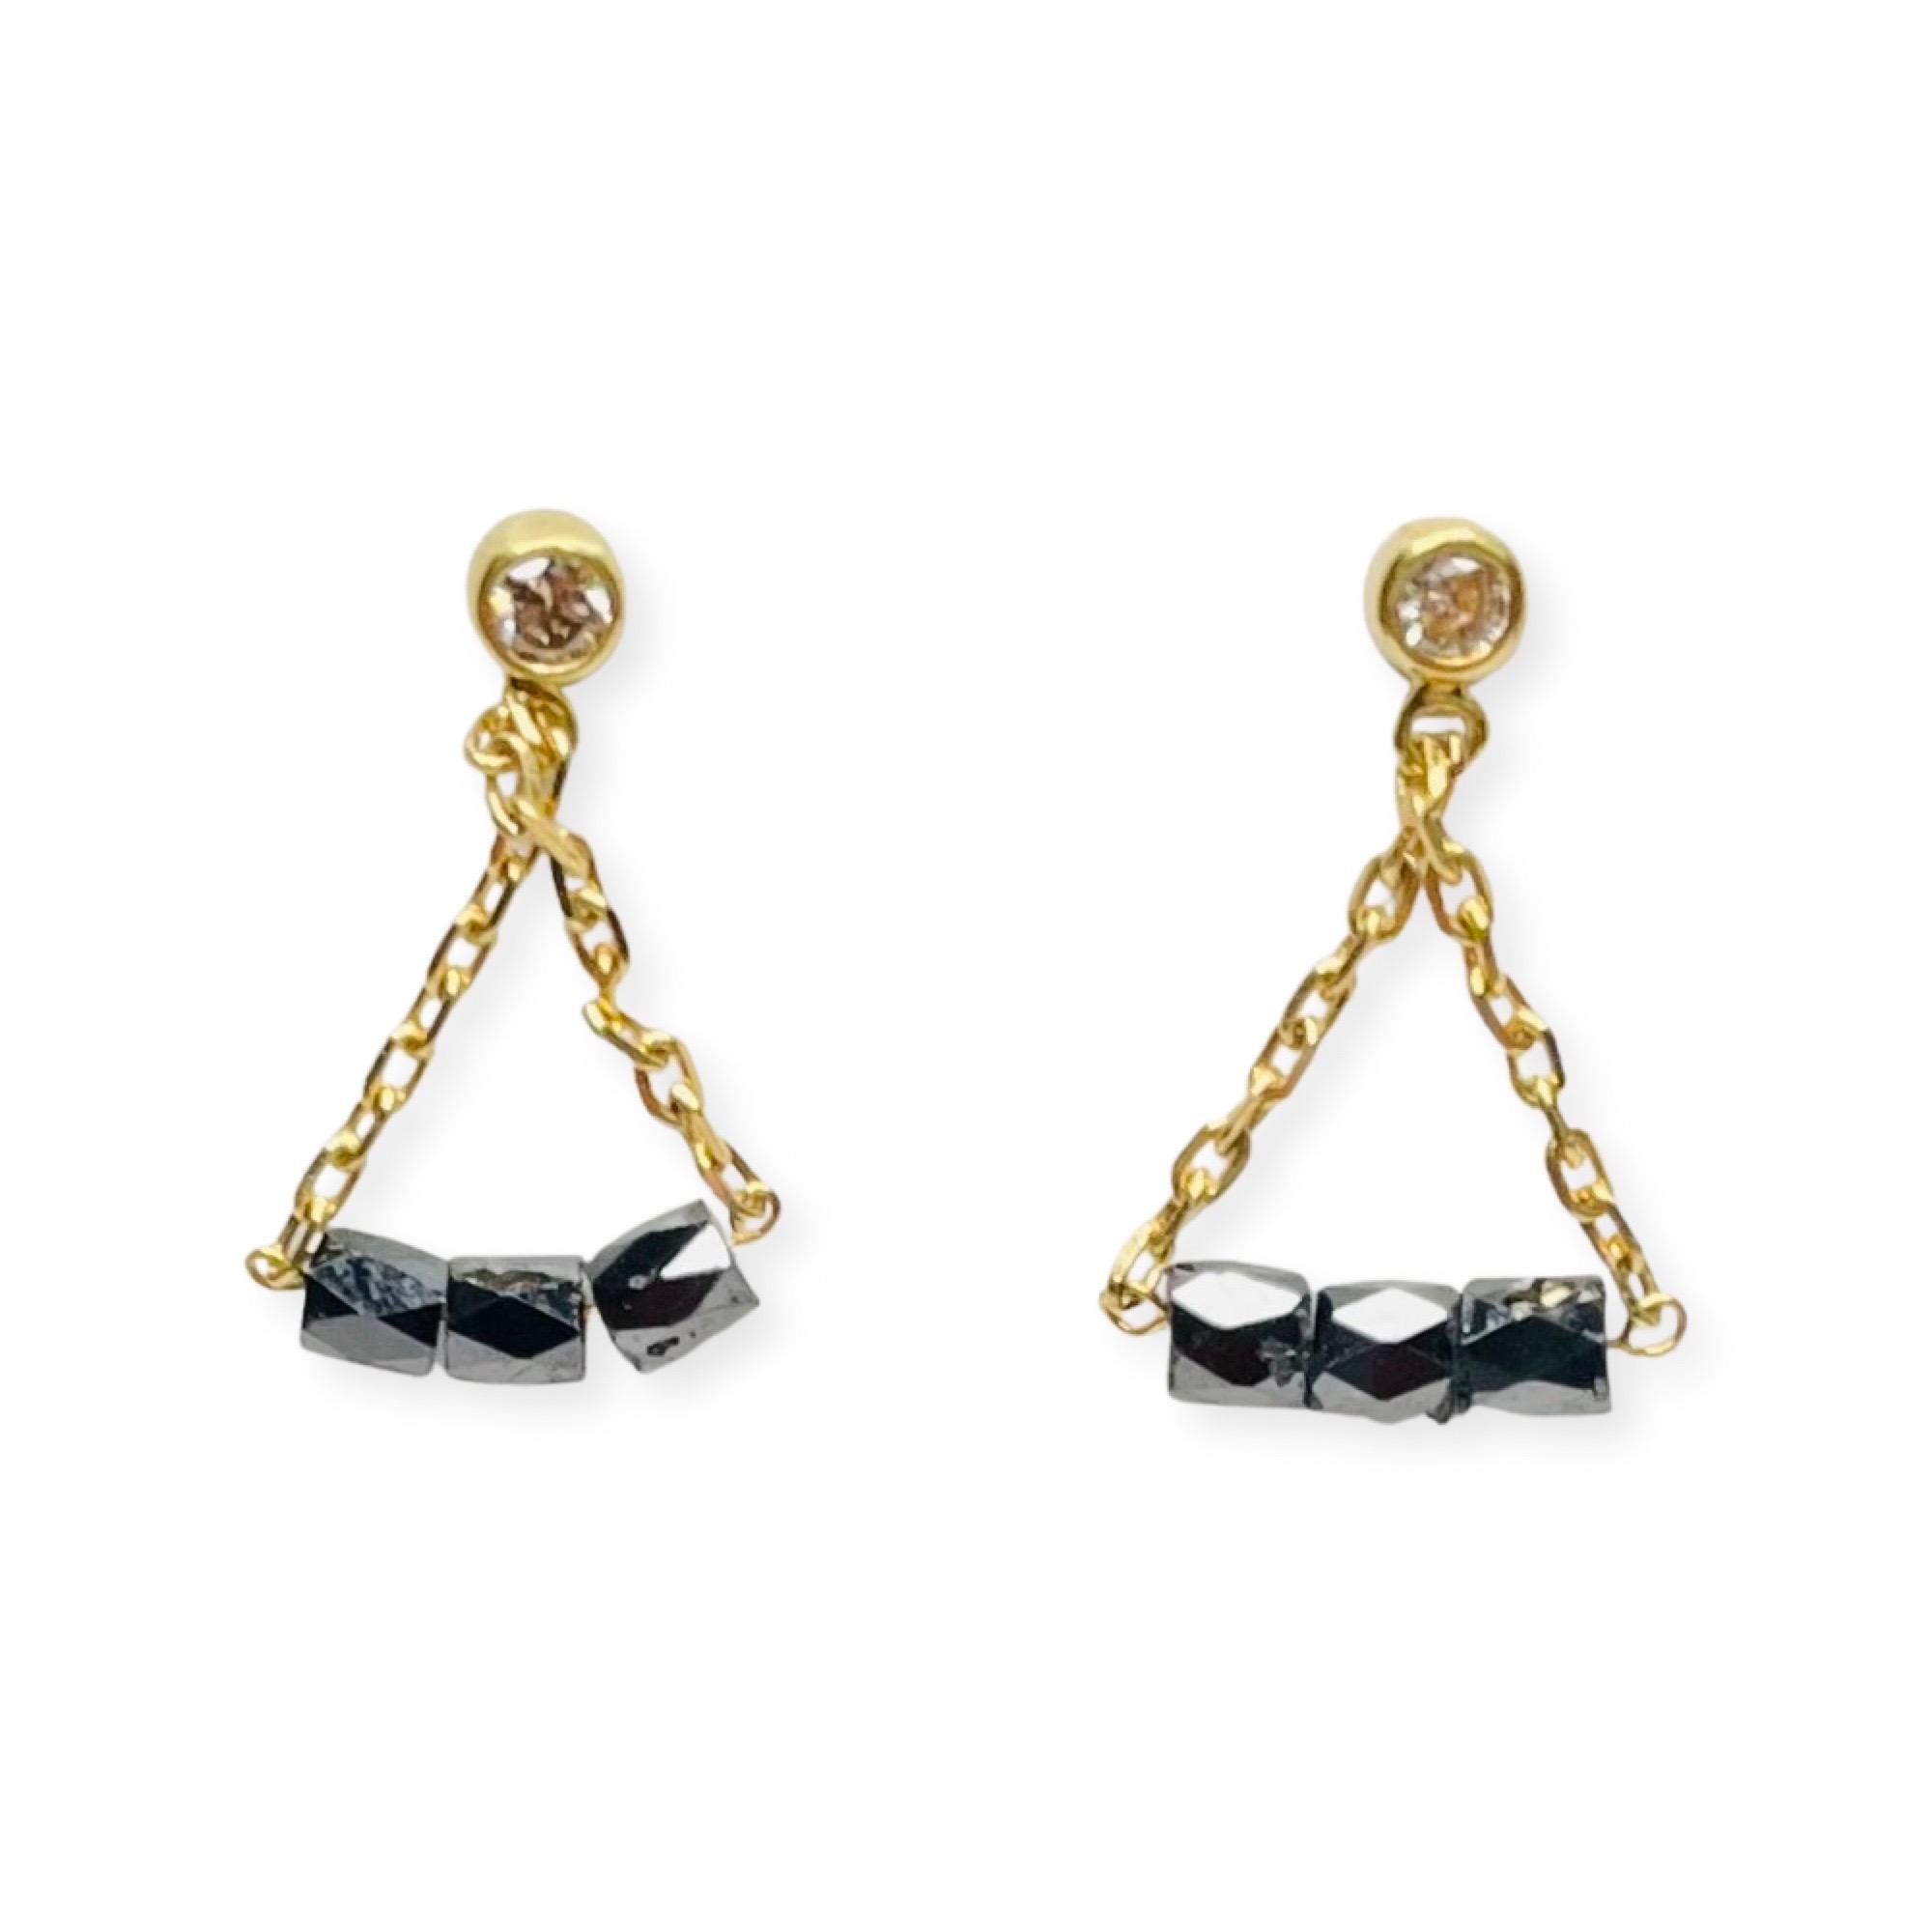 Lithos 18K Yellow Gold Black Diamond Faceted Barrels Dangling from White Diamond Stud Earrings on a Gold Ball. The top stud earrings have a total weight of 0.10 carats.  The diamonds are of VS Clarity and GH Color. They are bezel set in 18K white